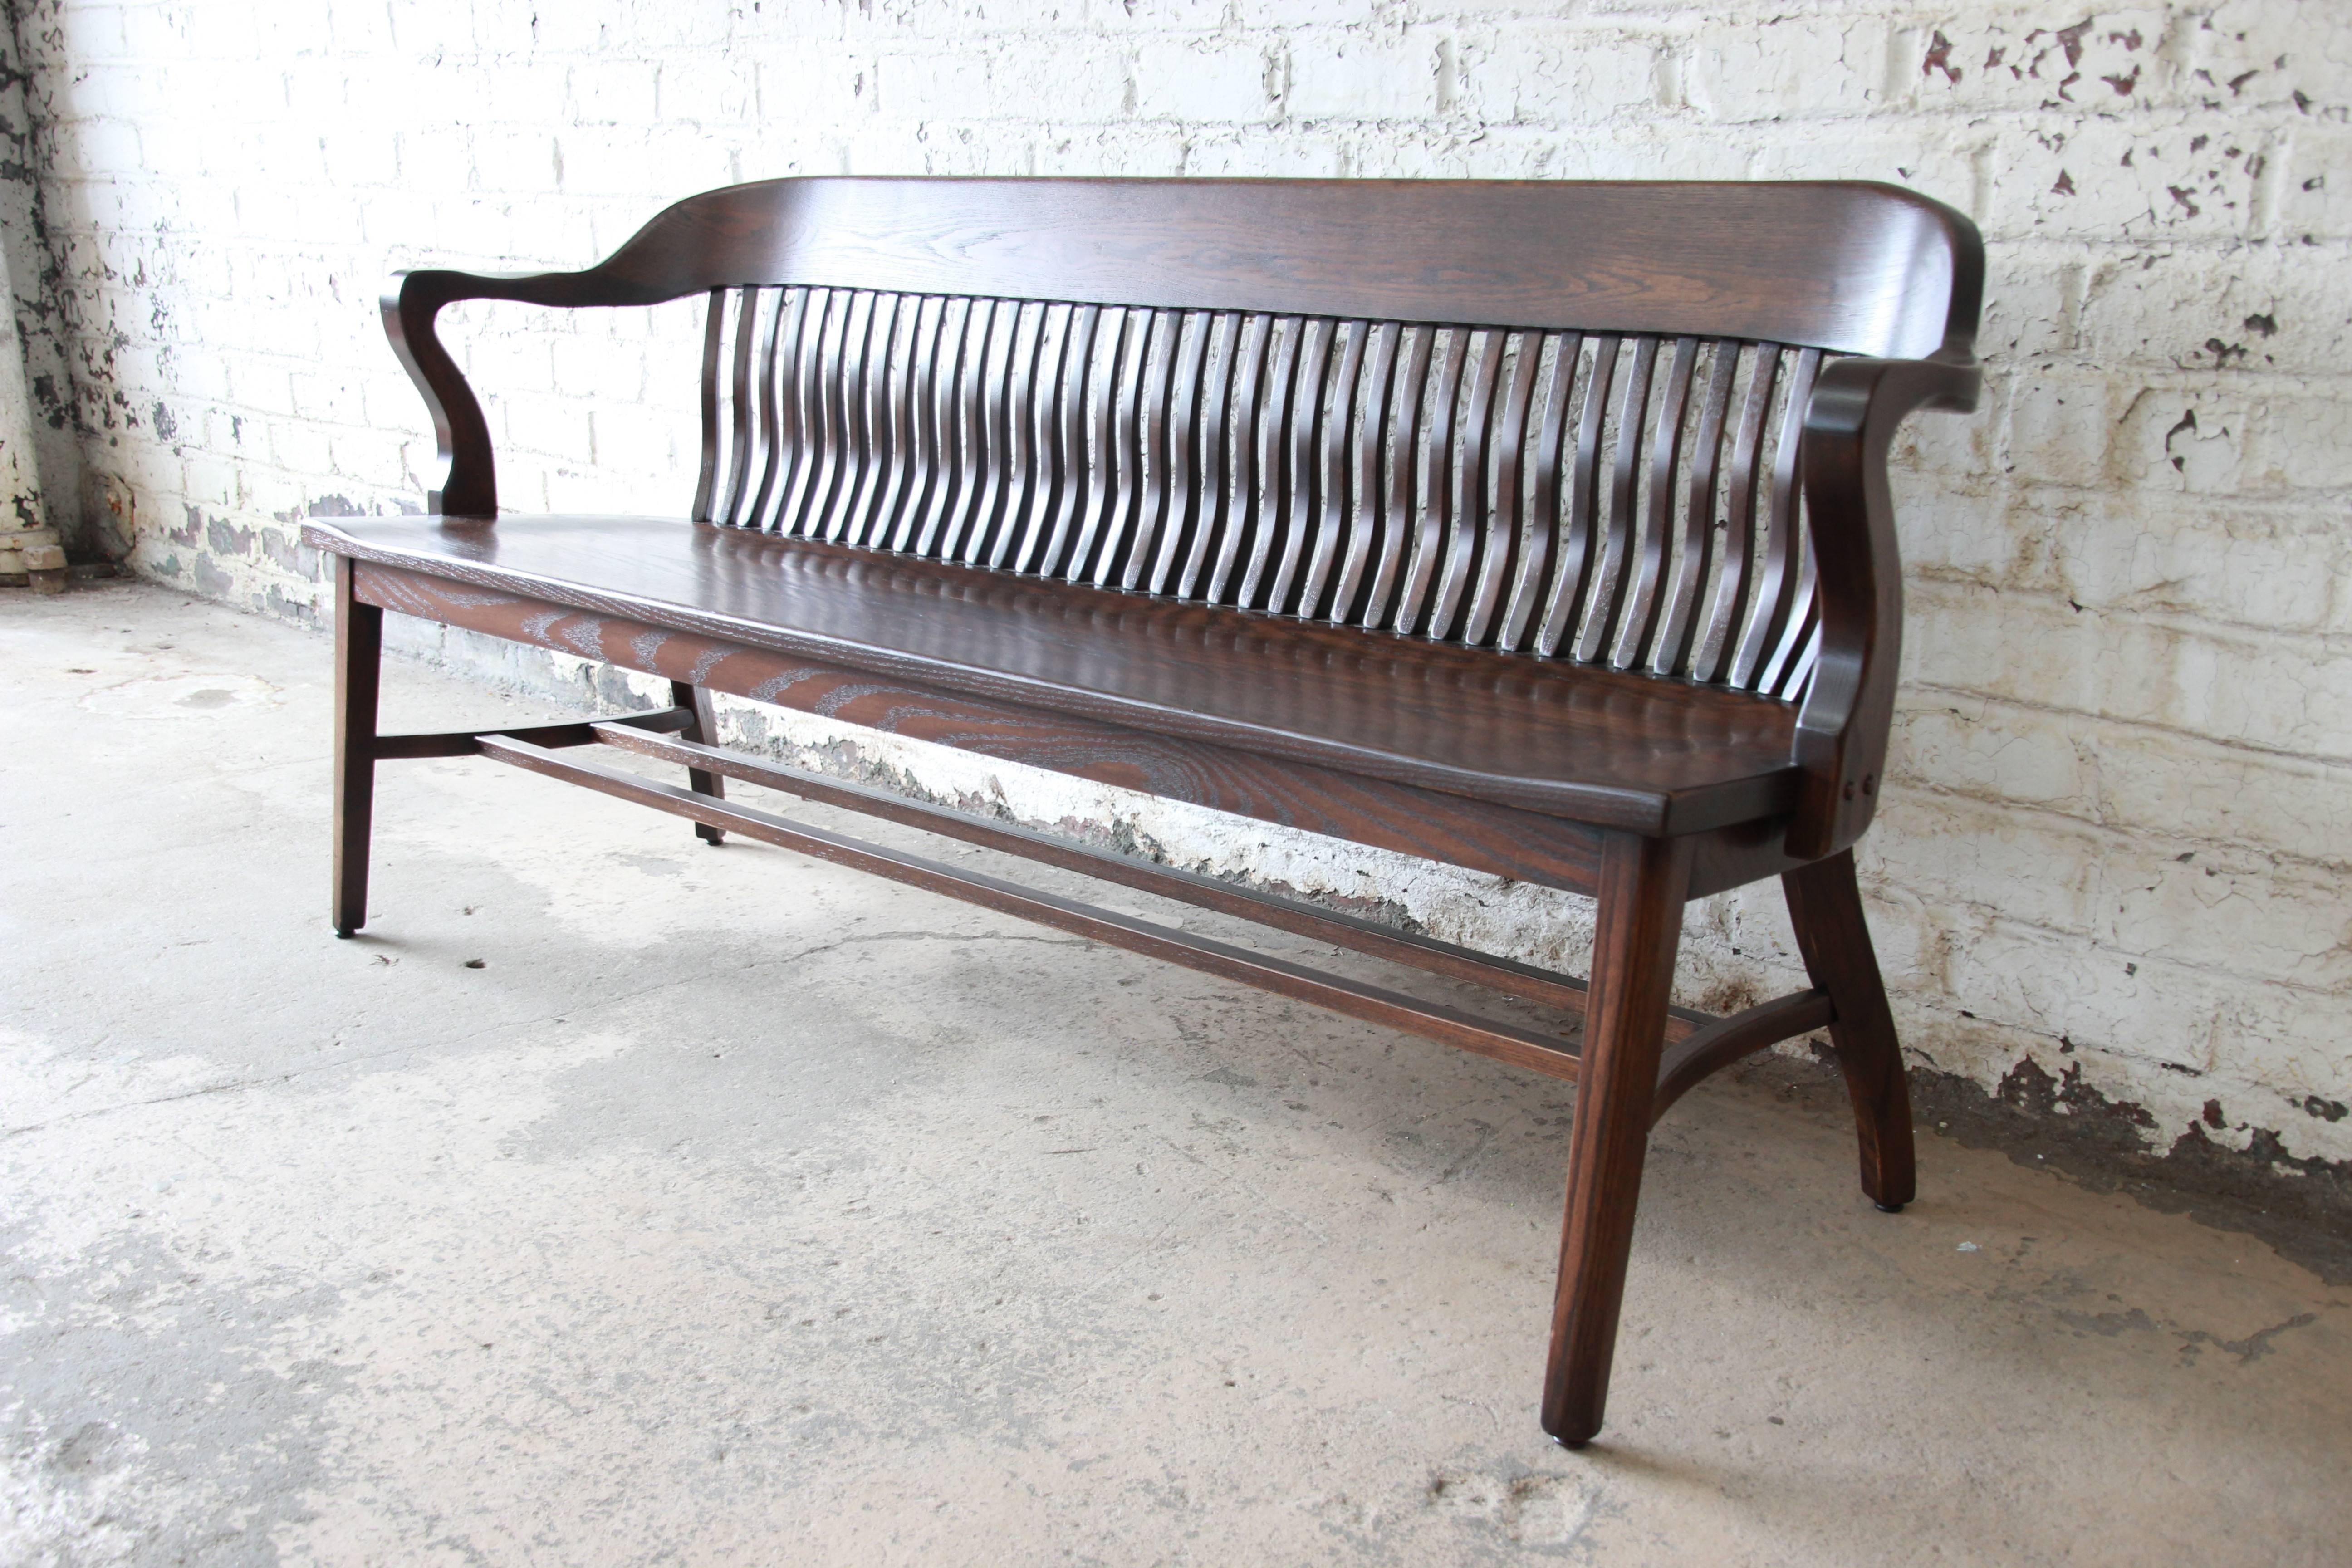 An exceptional newly refinished lawyer's bench in solid oak. The bench has beautiful wood grain and is constructed with quality craftsmanship and detail. The curved back with spindles and armrest provide great comfort on this versatile piece. The